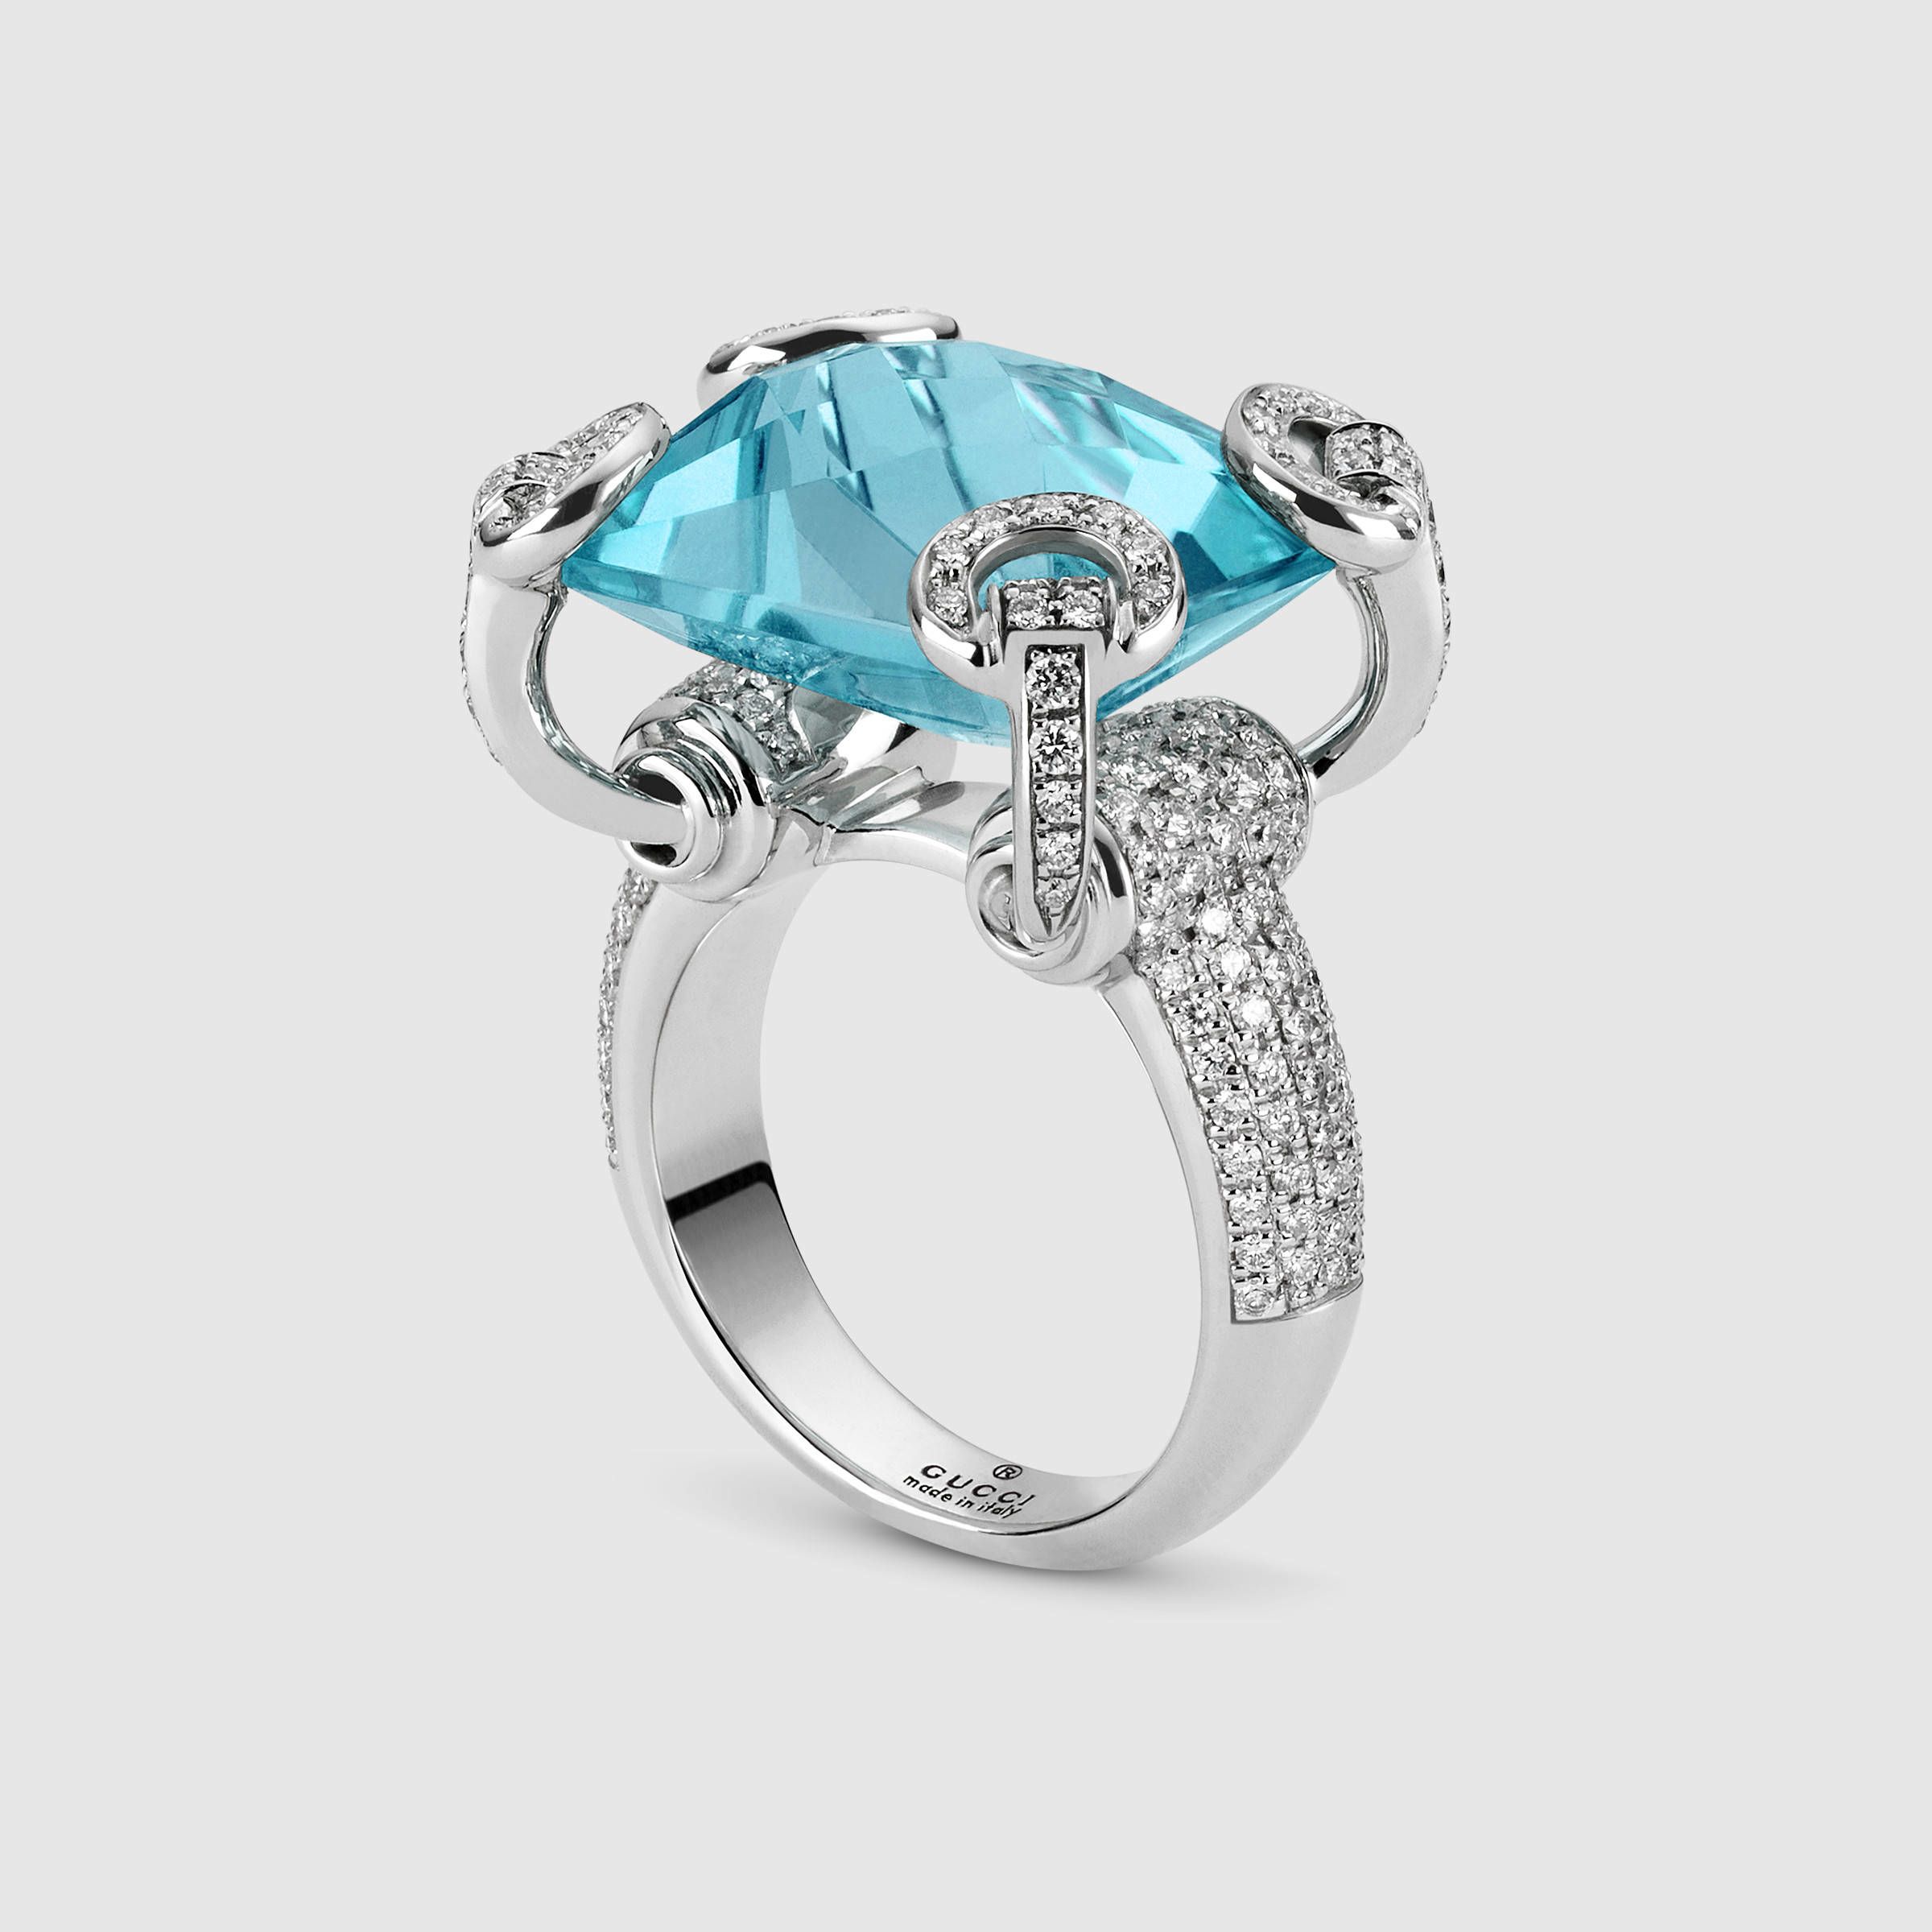 gucci cocktail ring